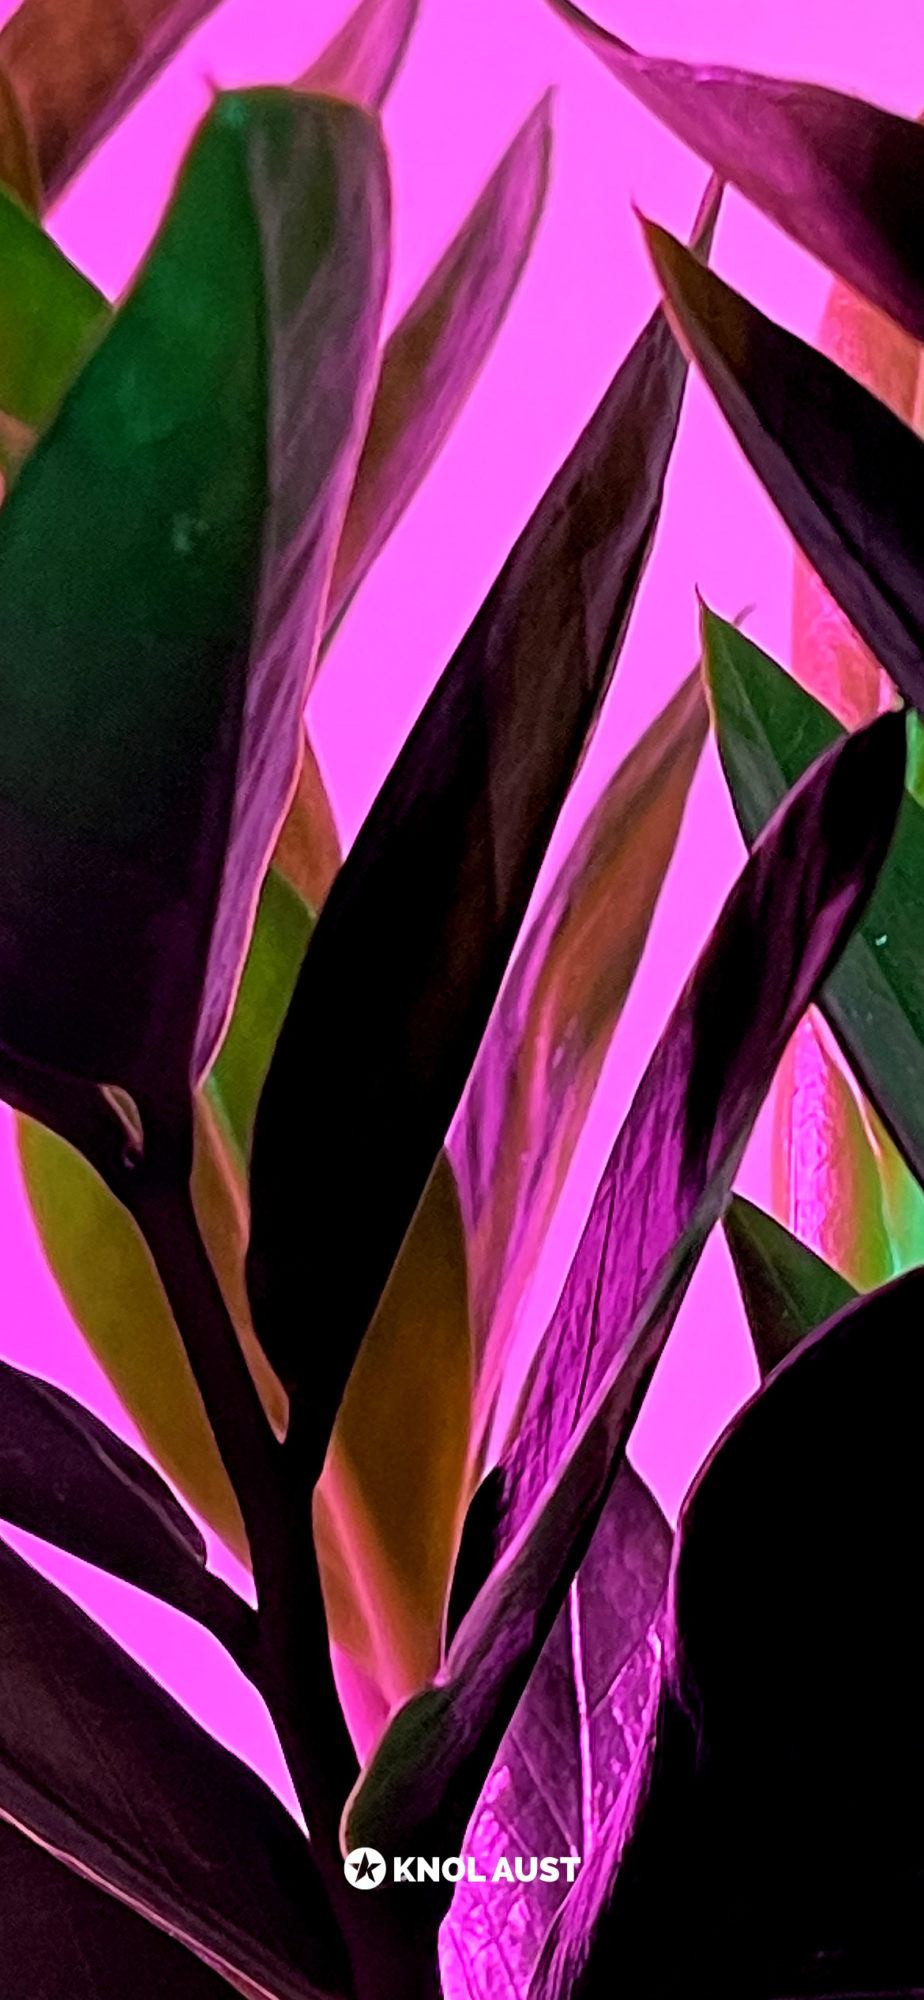 Photo of a ZZ plant with a magenta background made for smartphone devices